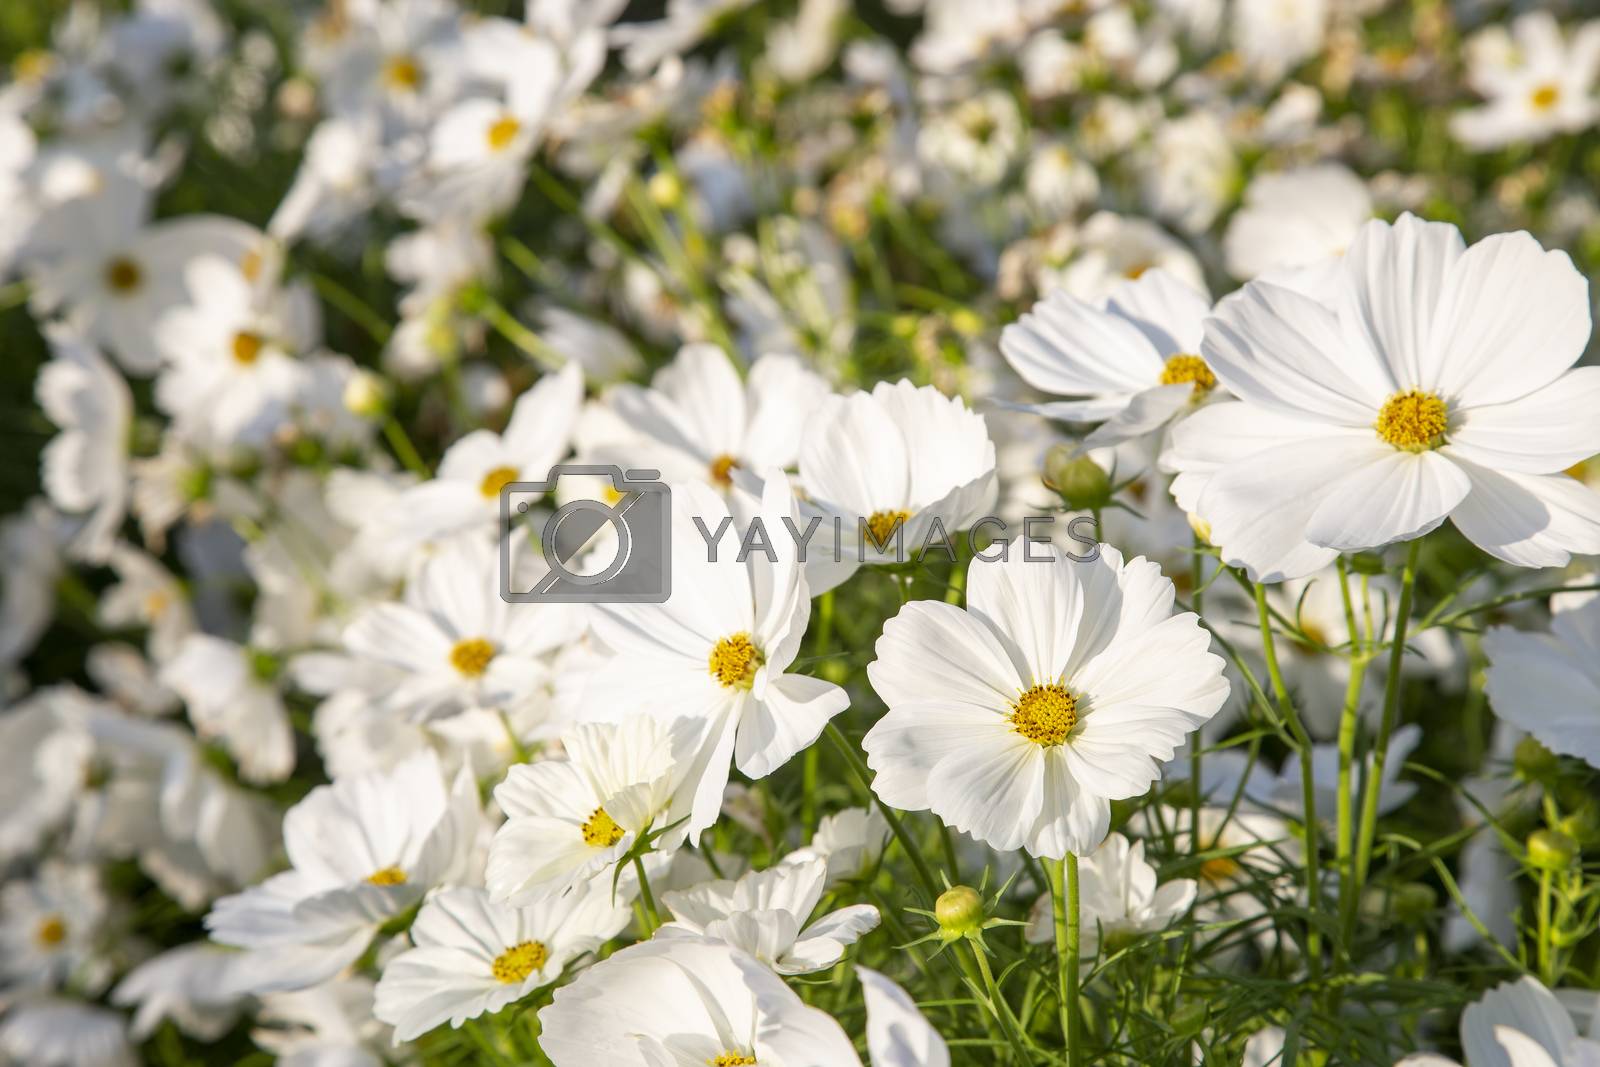 Royalty free image of White cosmos flowers blooming by liewluck